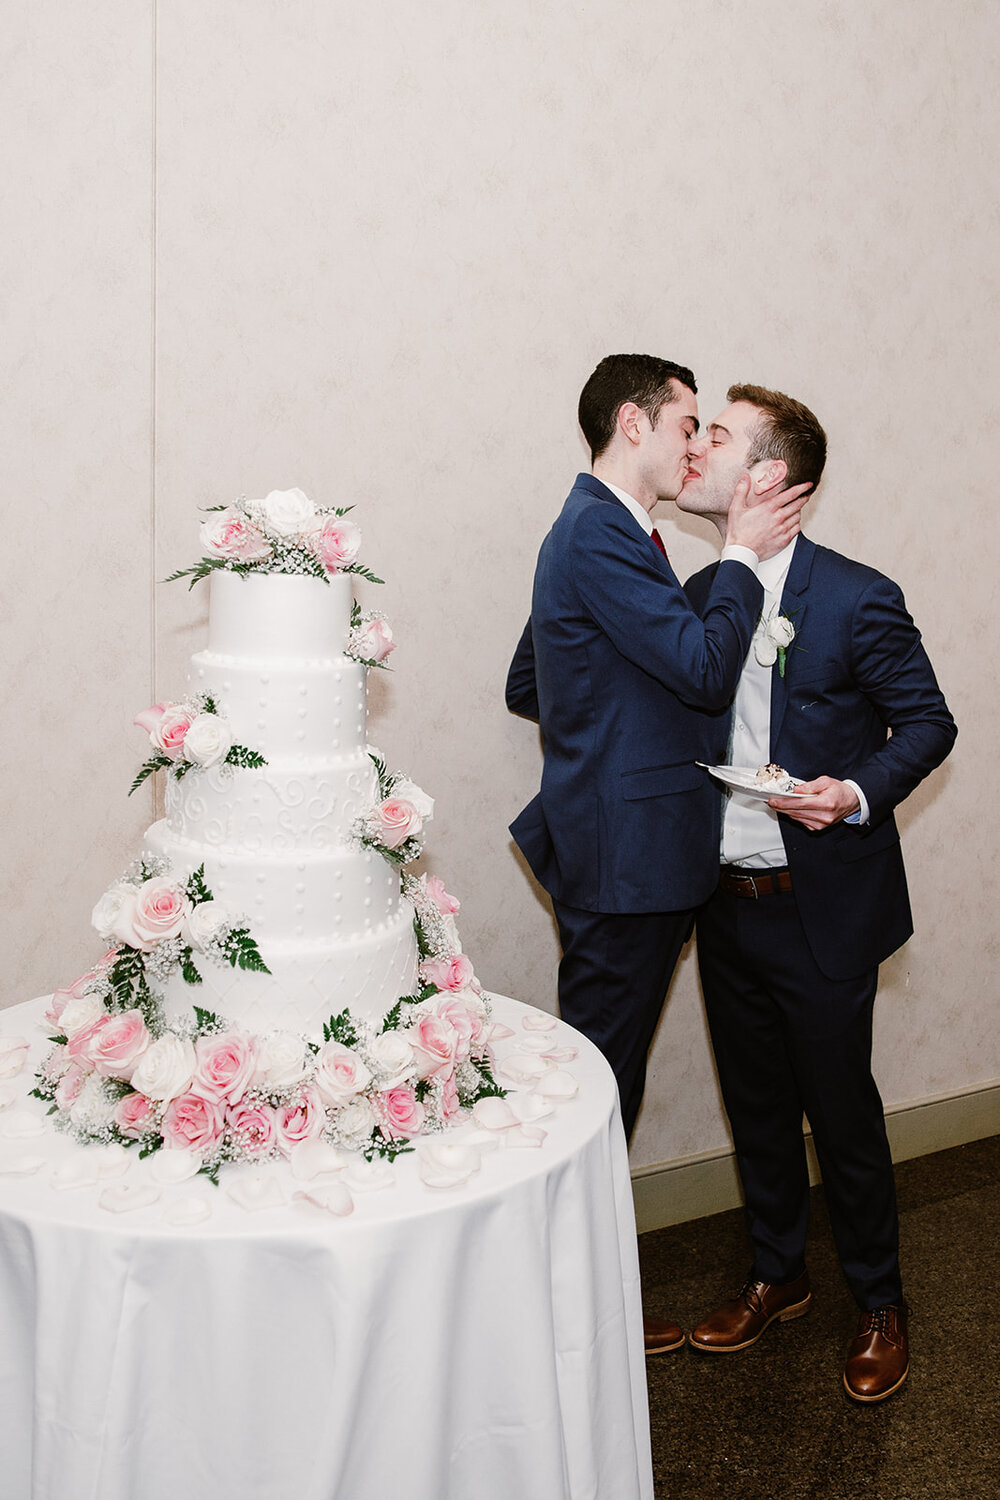  Two grooms cutting the cake. Vegan wedding at the Norfolk Botanical Gardens, Norfolk, VA. Rose garden and plant inspired wedding on the first day of Pride month. Sarah Mattozzi Photography. 